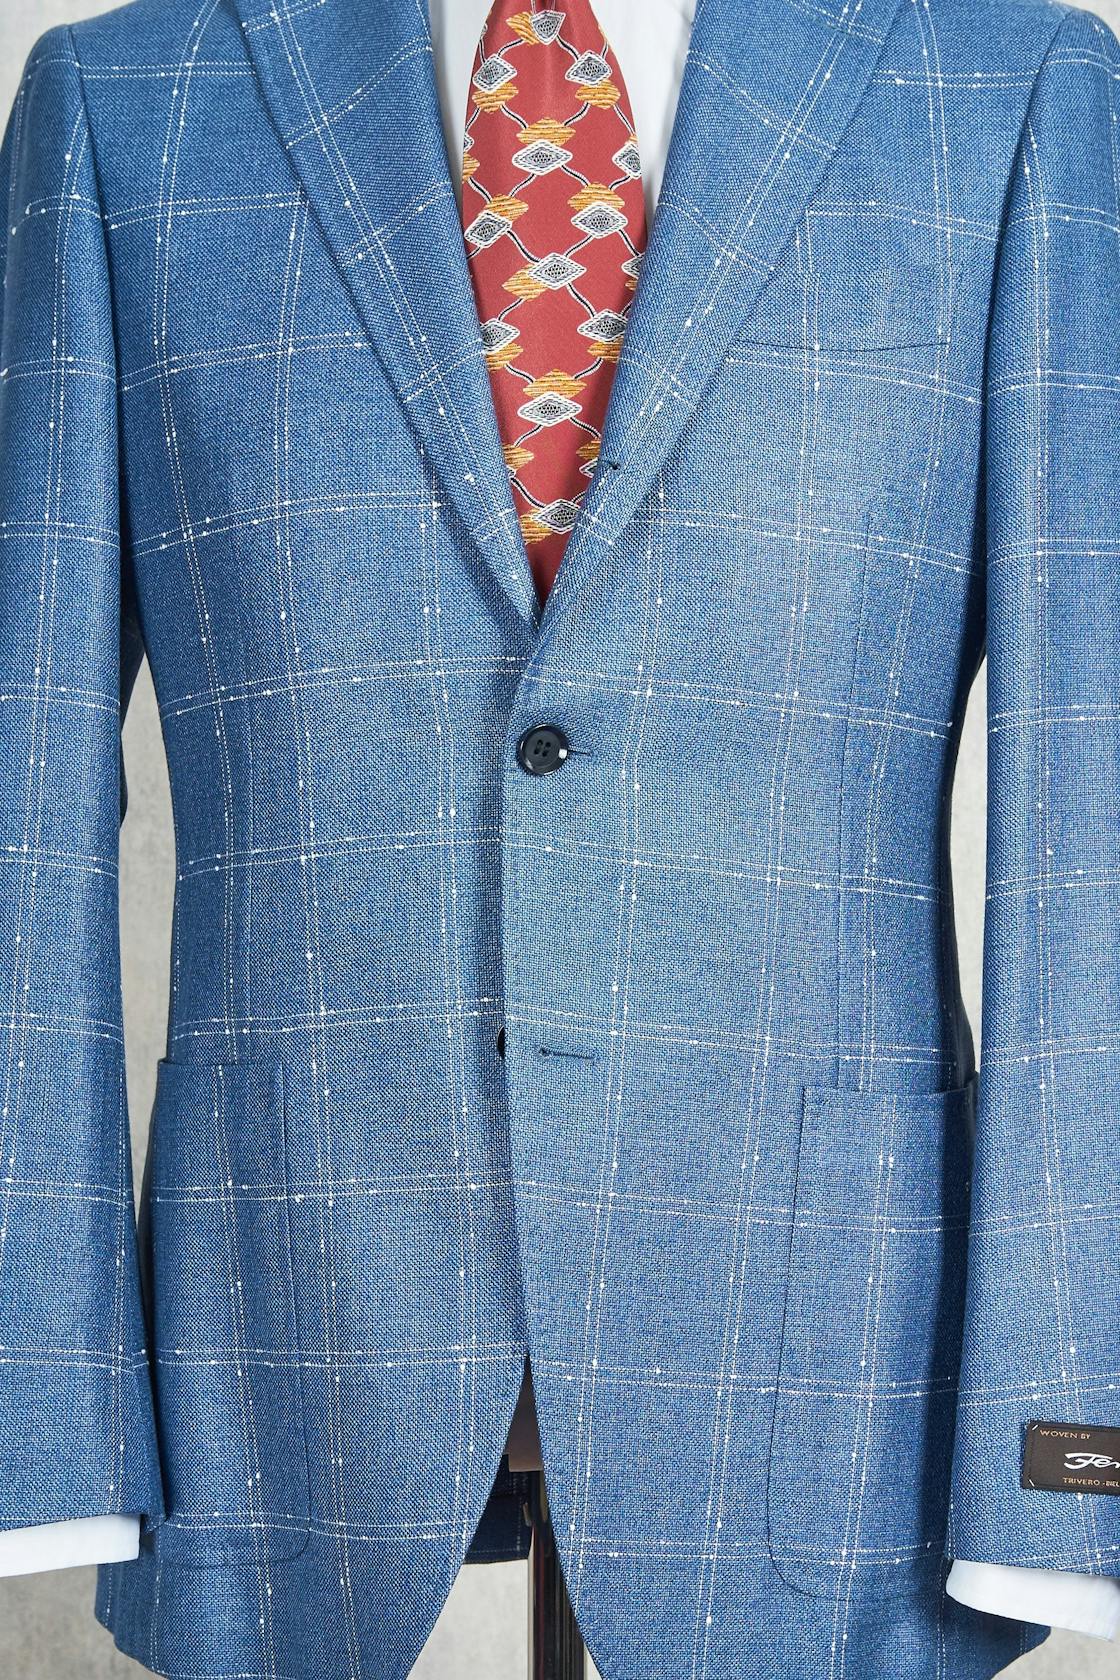 Ring Jacket 184 Light Blue with White Check Silk/Cotton Sport Coat